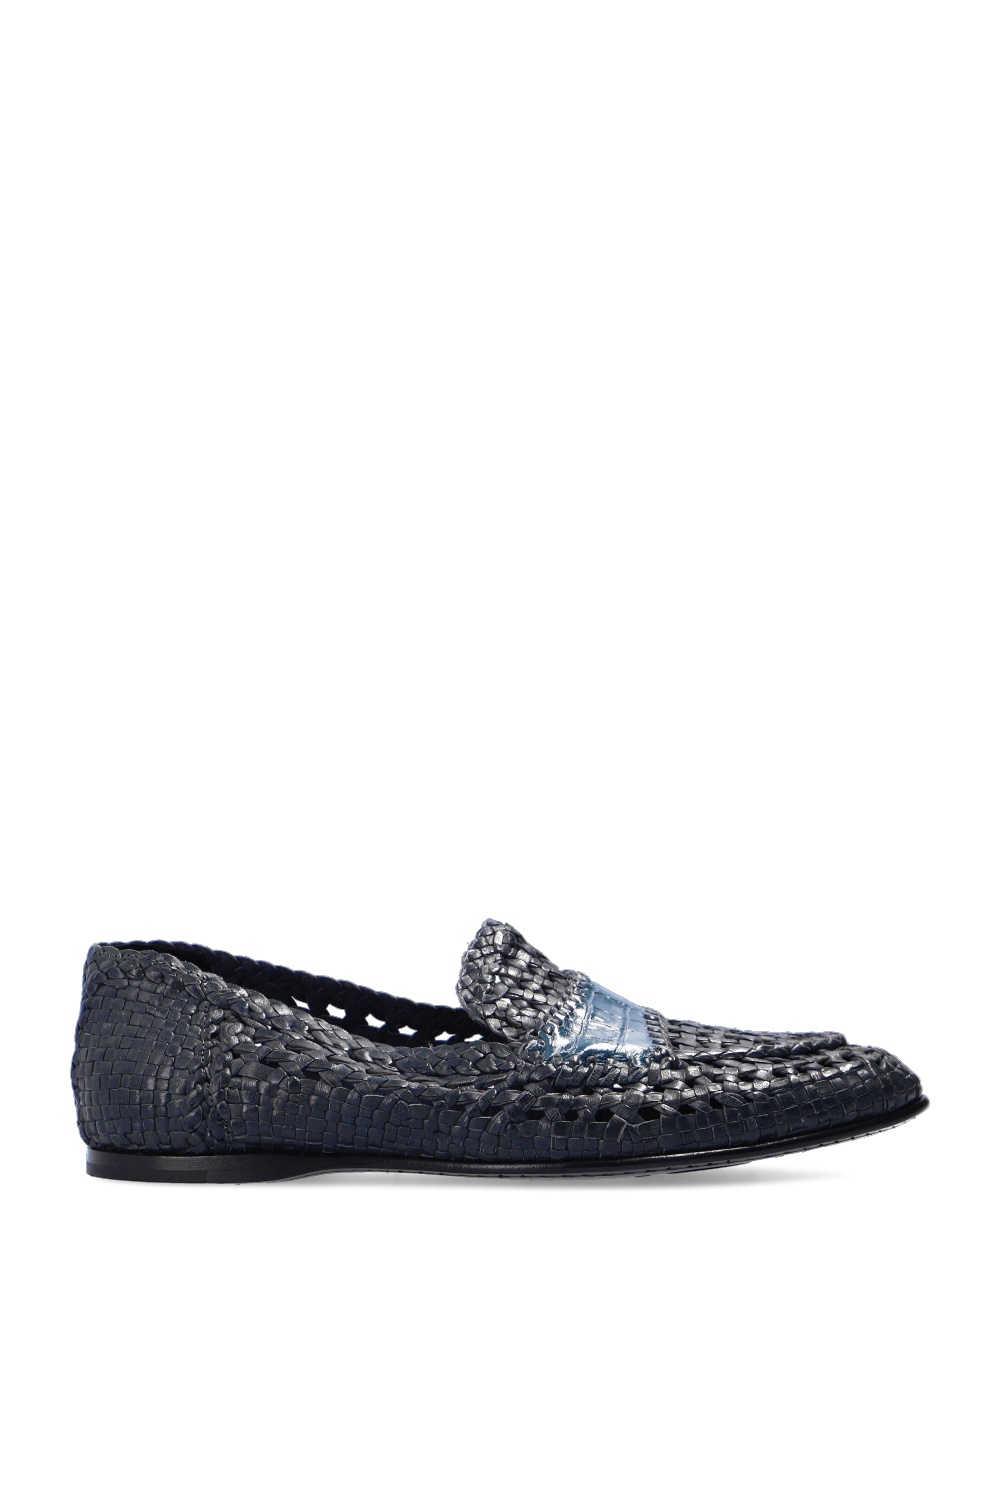 Dolce & Gabbana sequin-embellished double-breasted suit Leather loafers